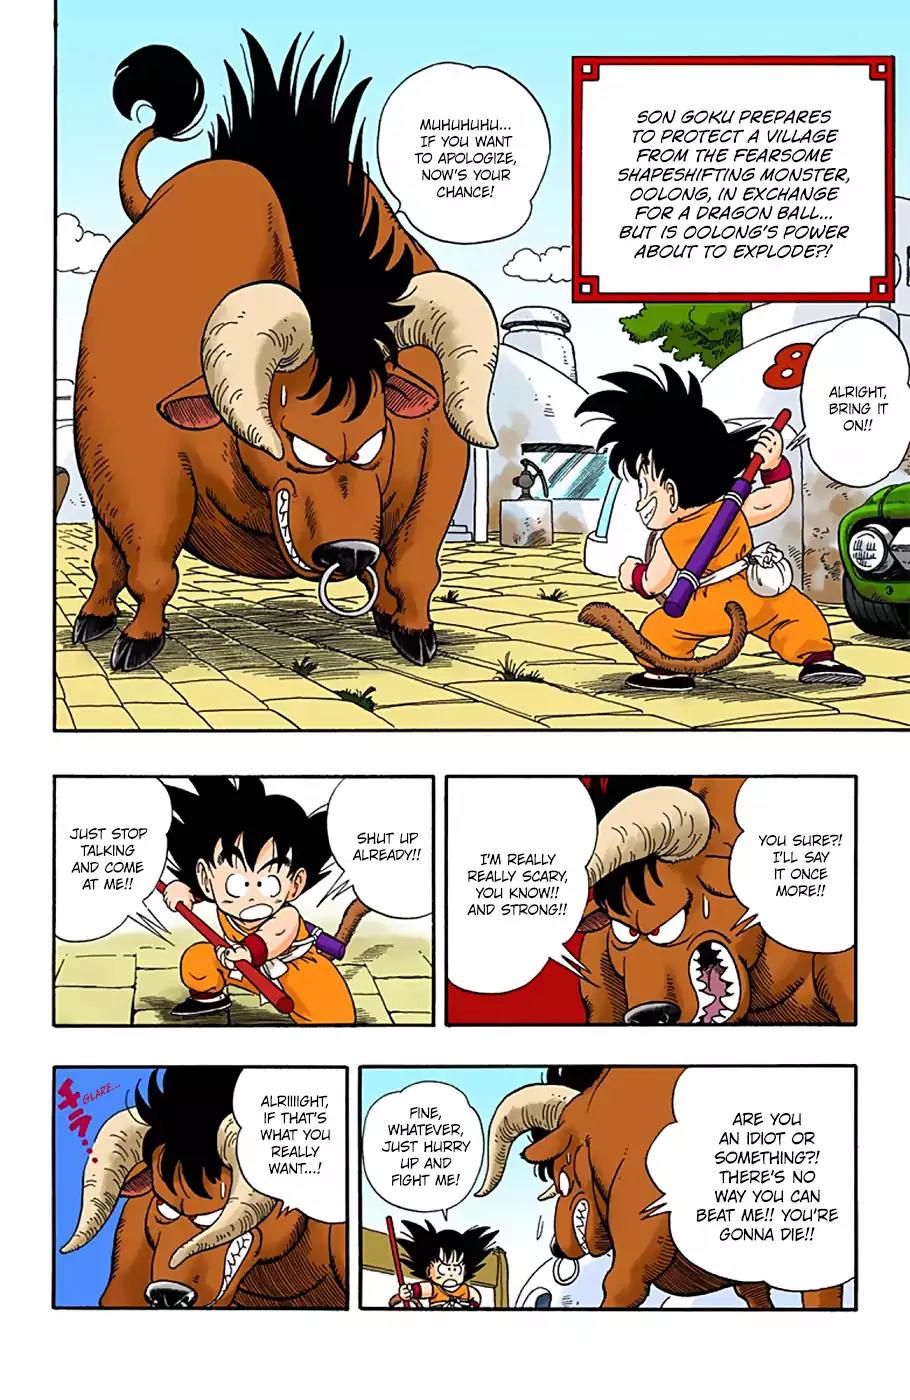 Dragon Ball - Full Color Vol.1 Chapter 6: